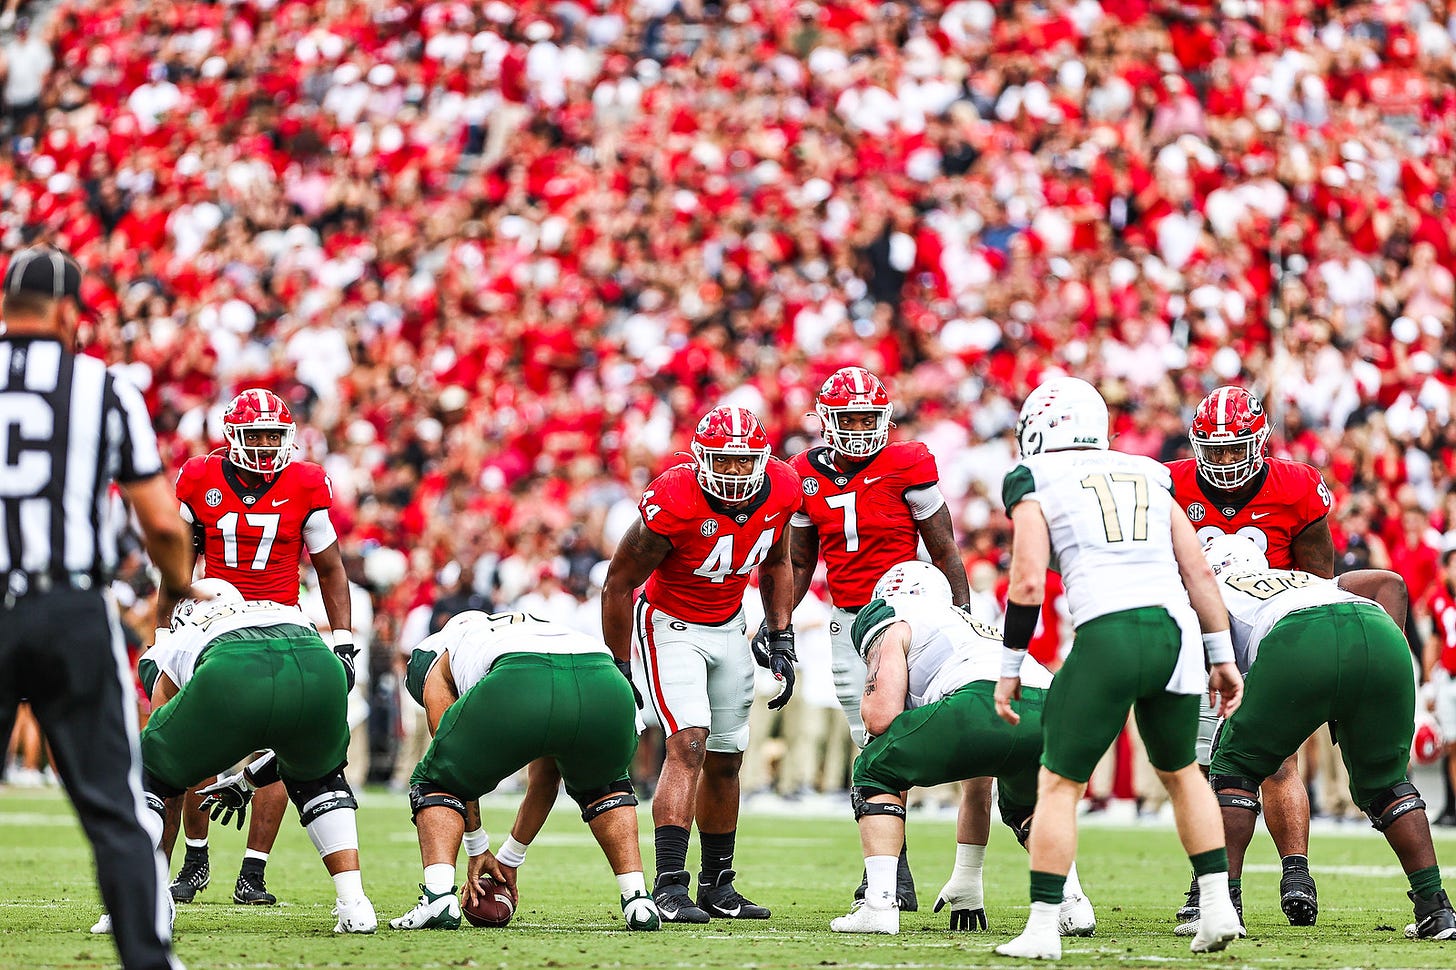 Georgia defensive lineman Travon Walker (44) during the Bulldogs’ game against UAB in Athens, Ga., on Saturday, Sept. 11, 2021. (Photo by Tony Walsh)